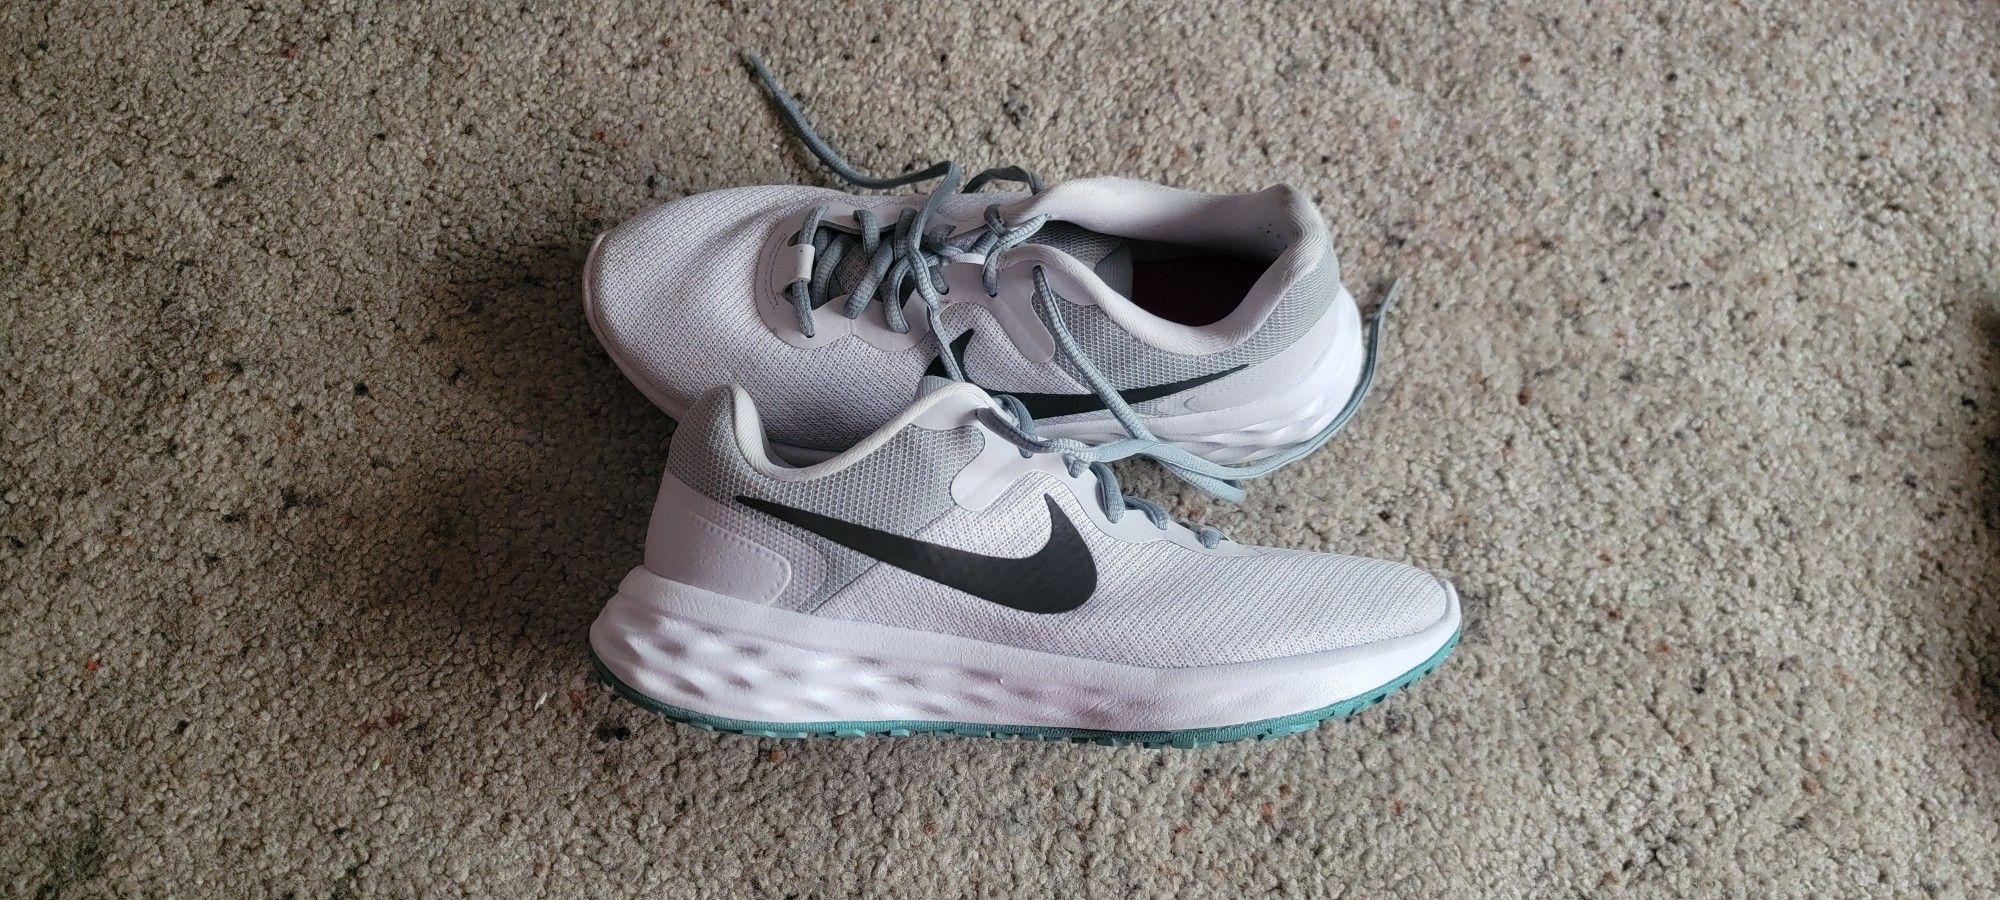 BRAND NEW Size 7.5 Women's Nike Shoes